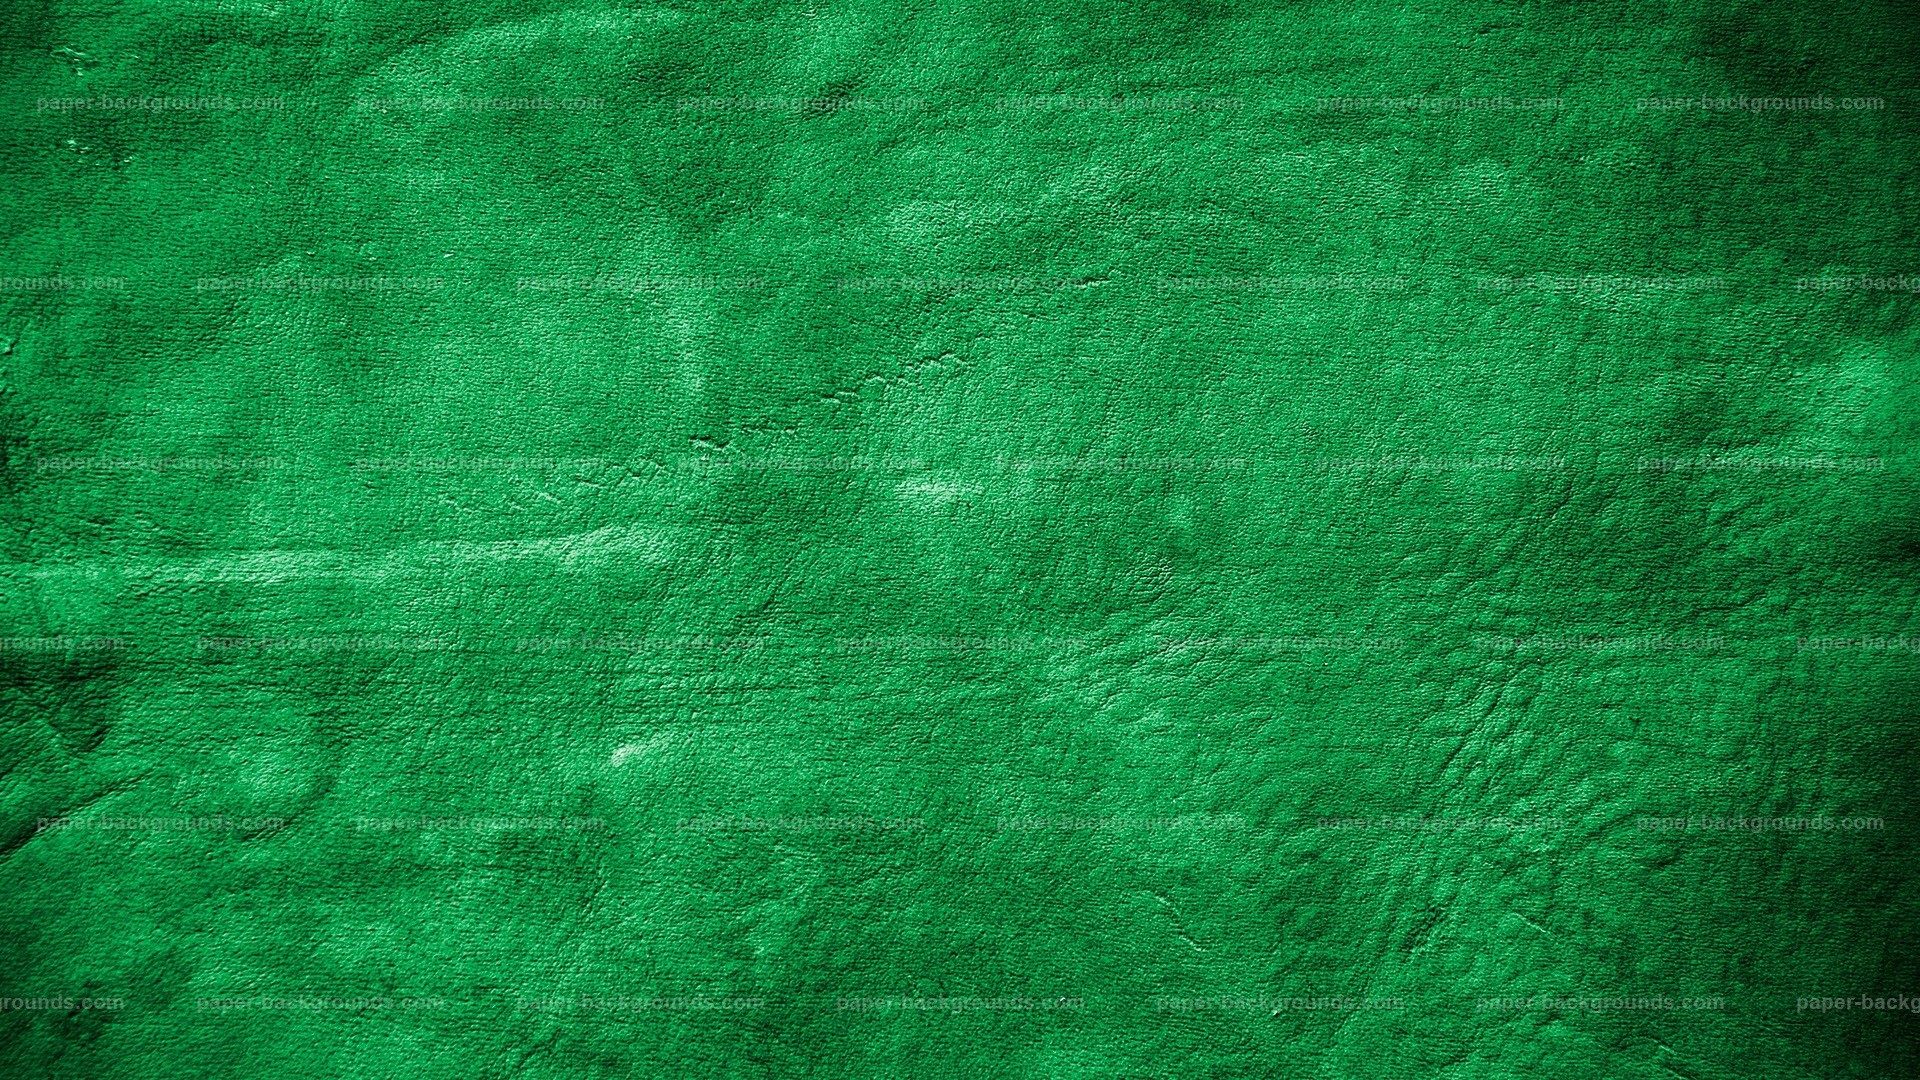 Wallpaper HD Emerald Green with image resolution 1920x1080 pixel. You can make this wallpaper for your Desktop Computer Backgrounds, Mac Wallpapers, Android Lock screen or iPhone Screensavers